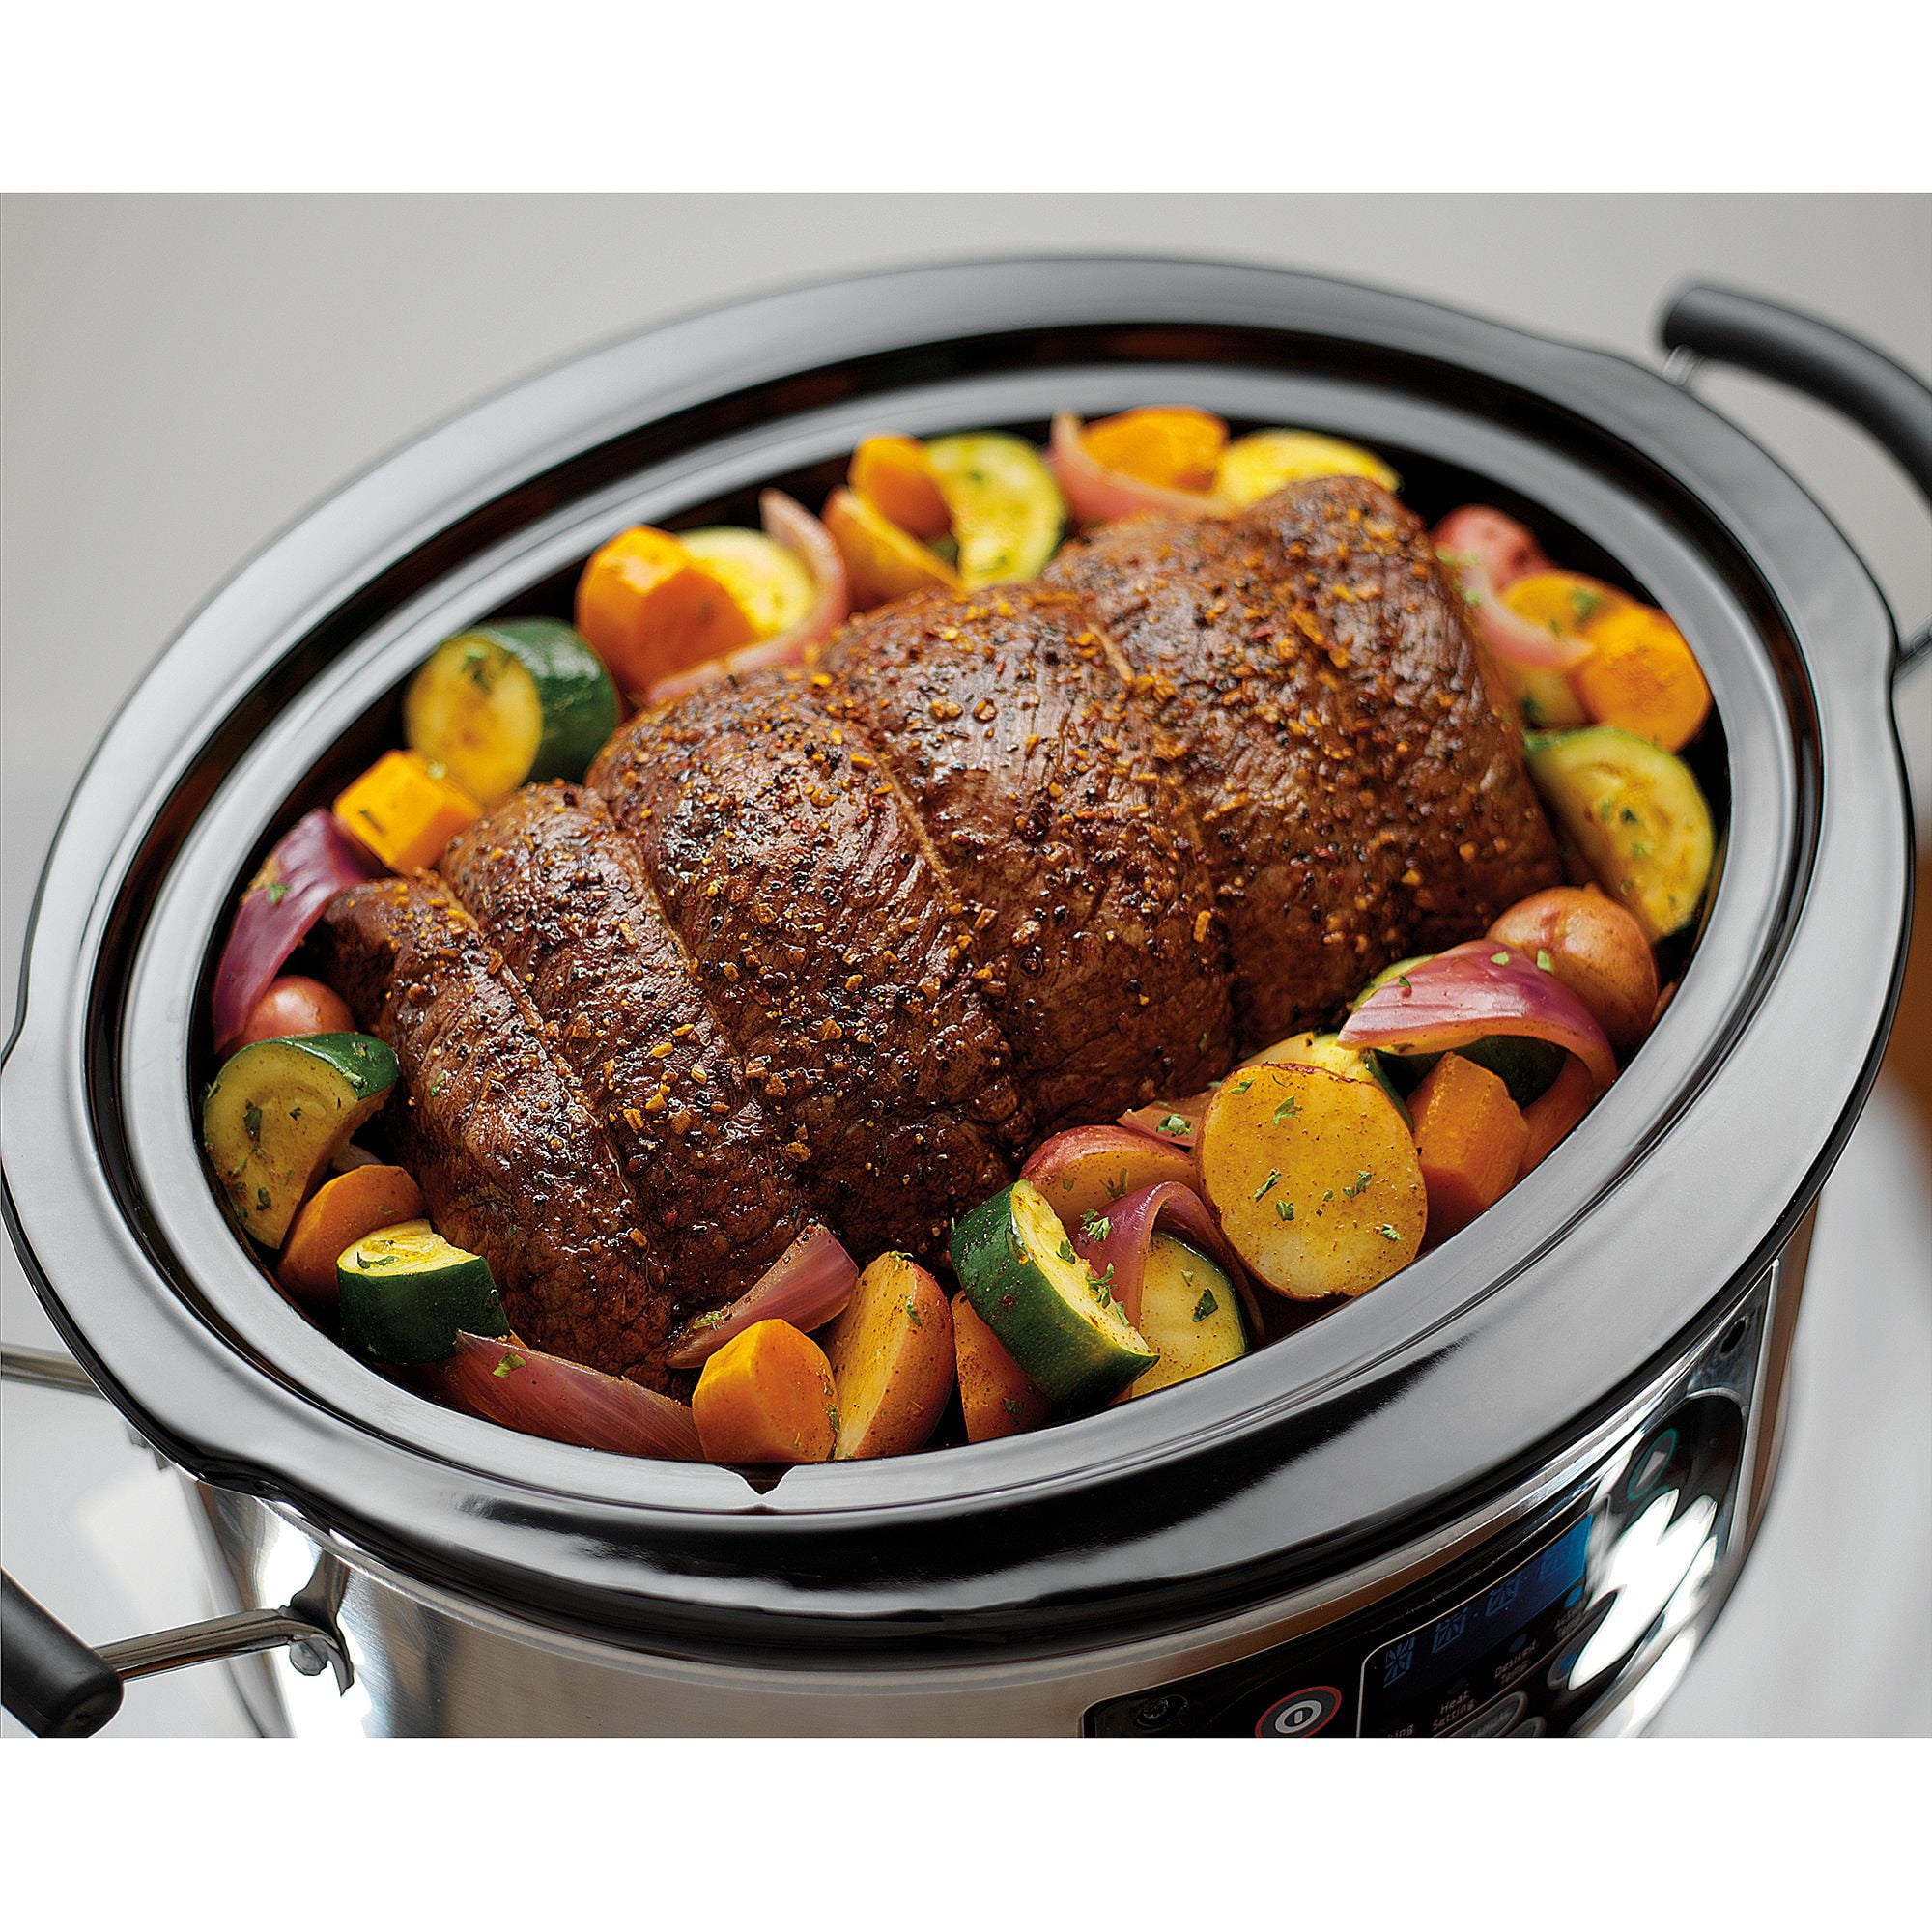 Stay or Go® Football Slow Cooker - 33462